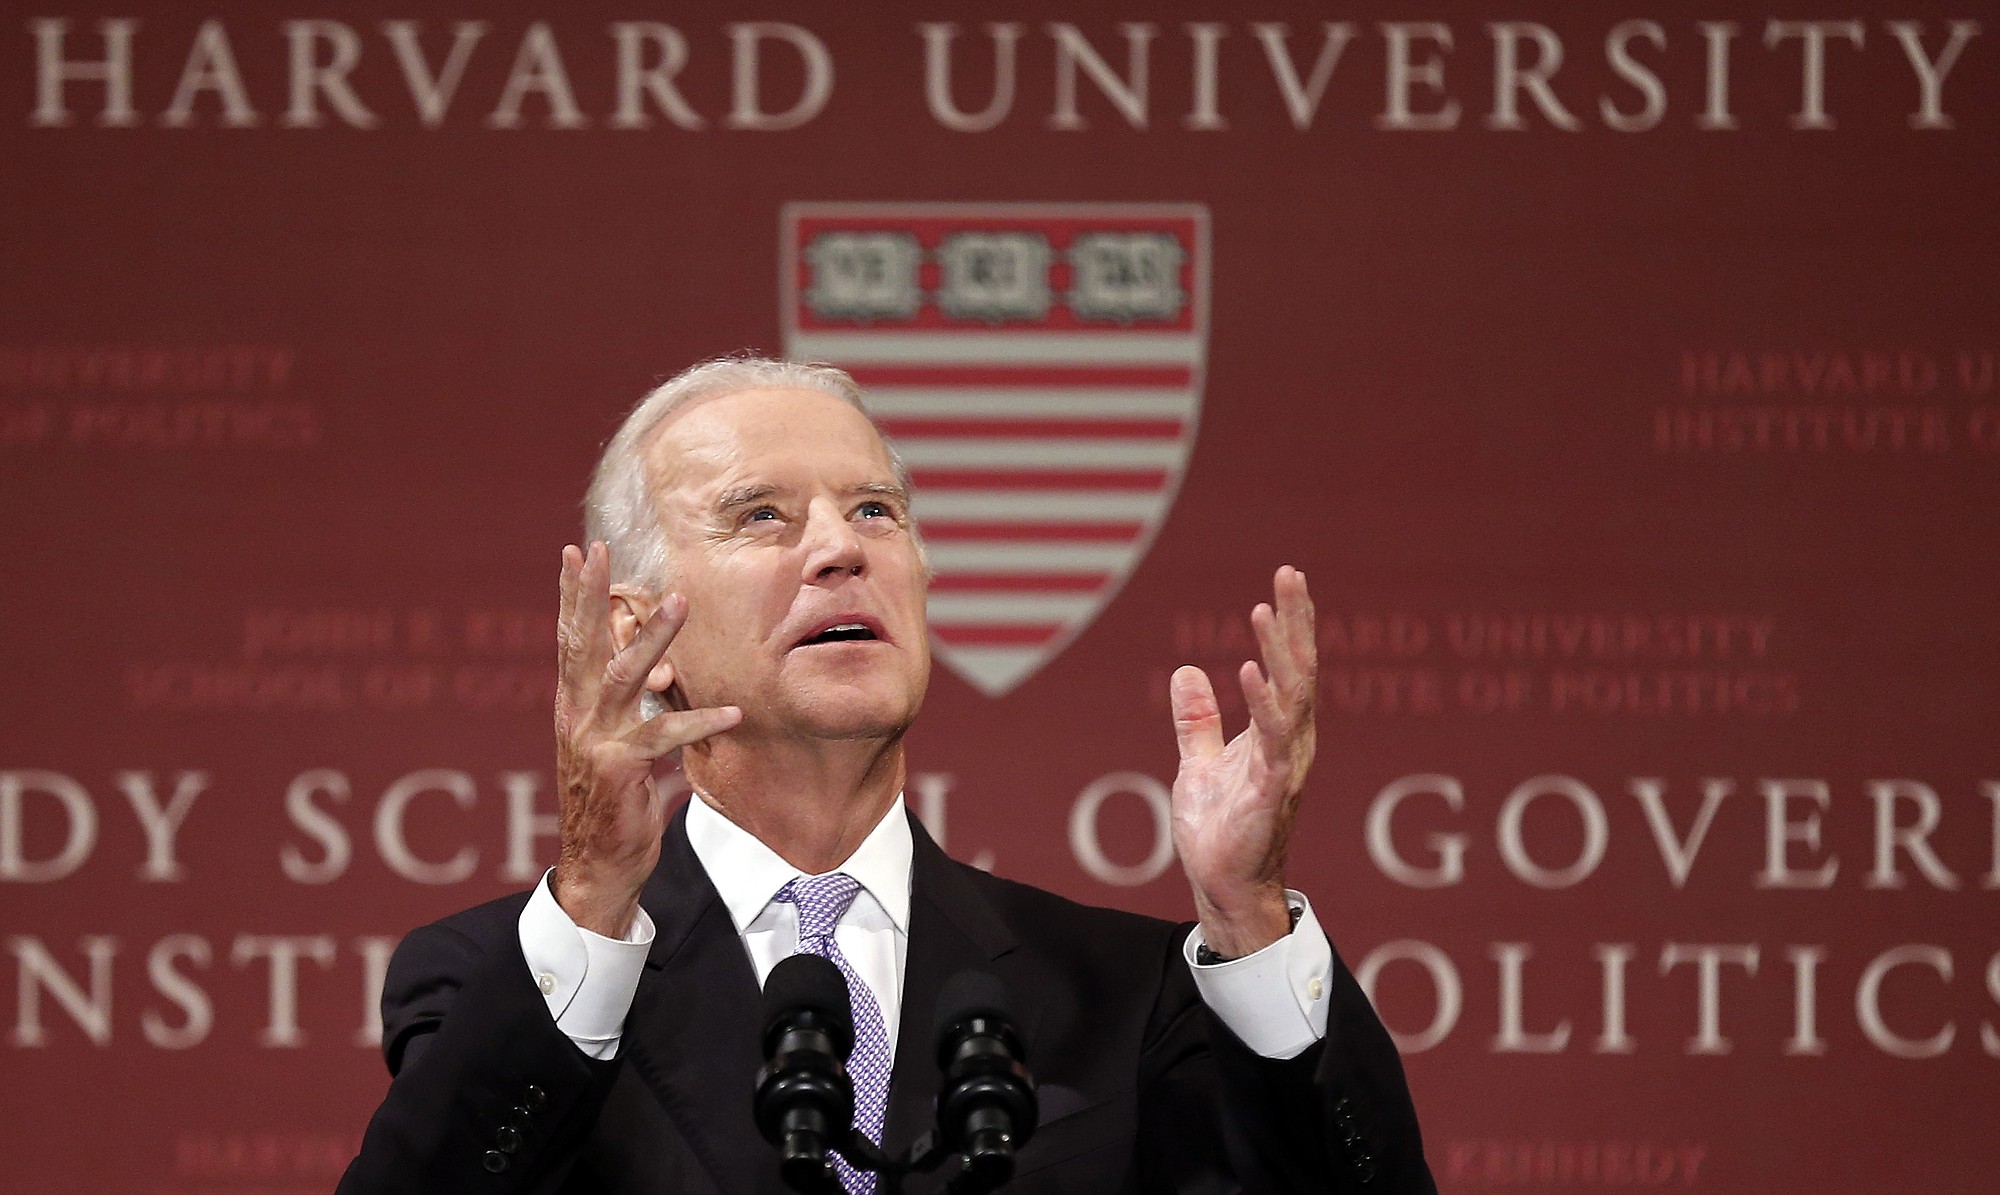 Vice President Joe Biden speaks to students faculty and staff at Harvard University's Kennedy School of Government in Cambridge, Mass., on Thursday. He will speak in support of Democrats Sen. Jeff Merkley in Portland on Wednesday and Sen.